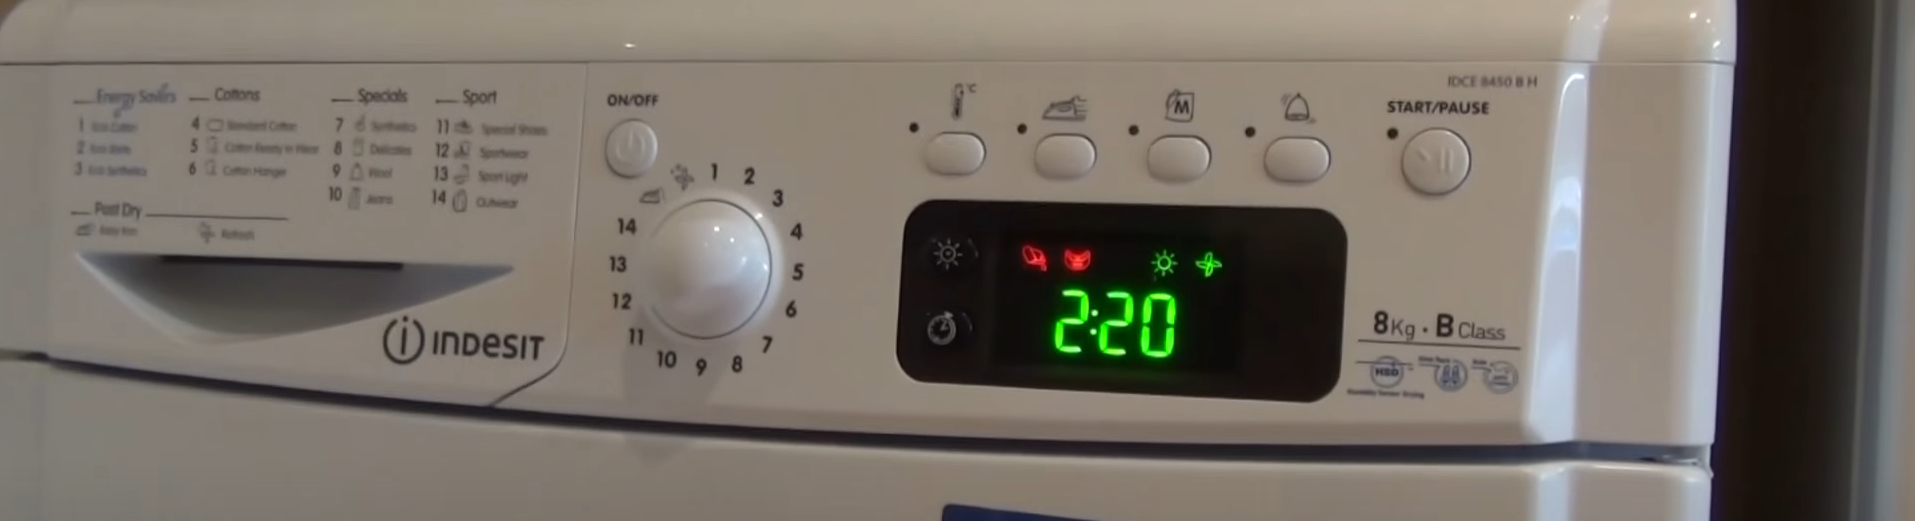 Indesit Tumble Dryer with control panel and in use